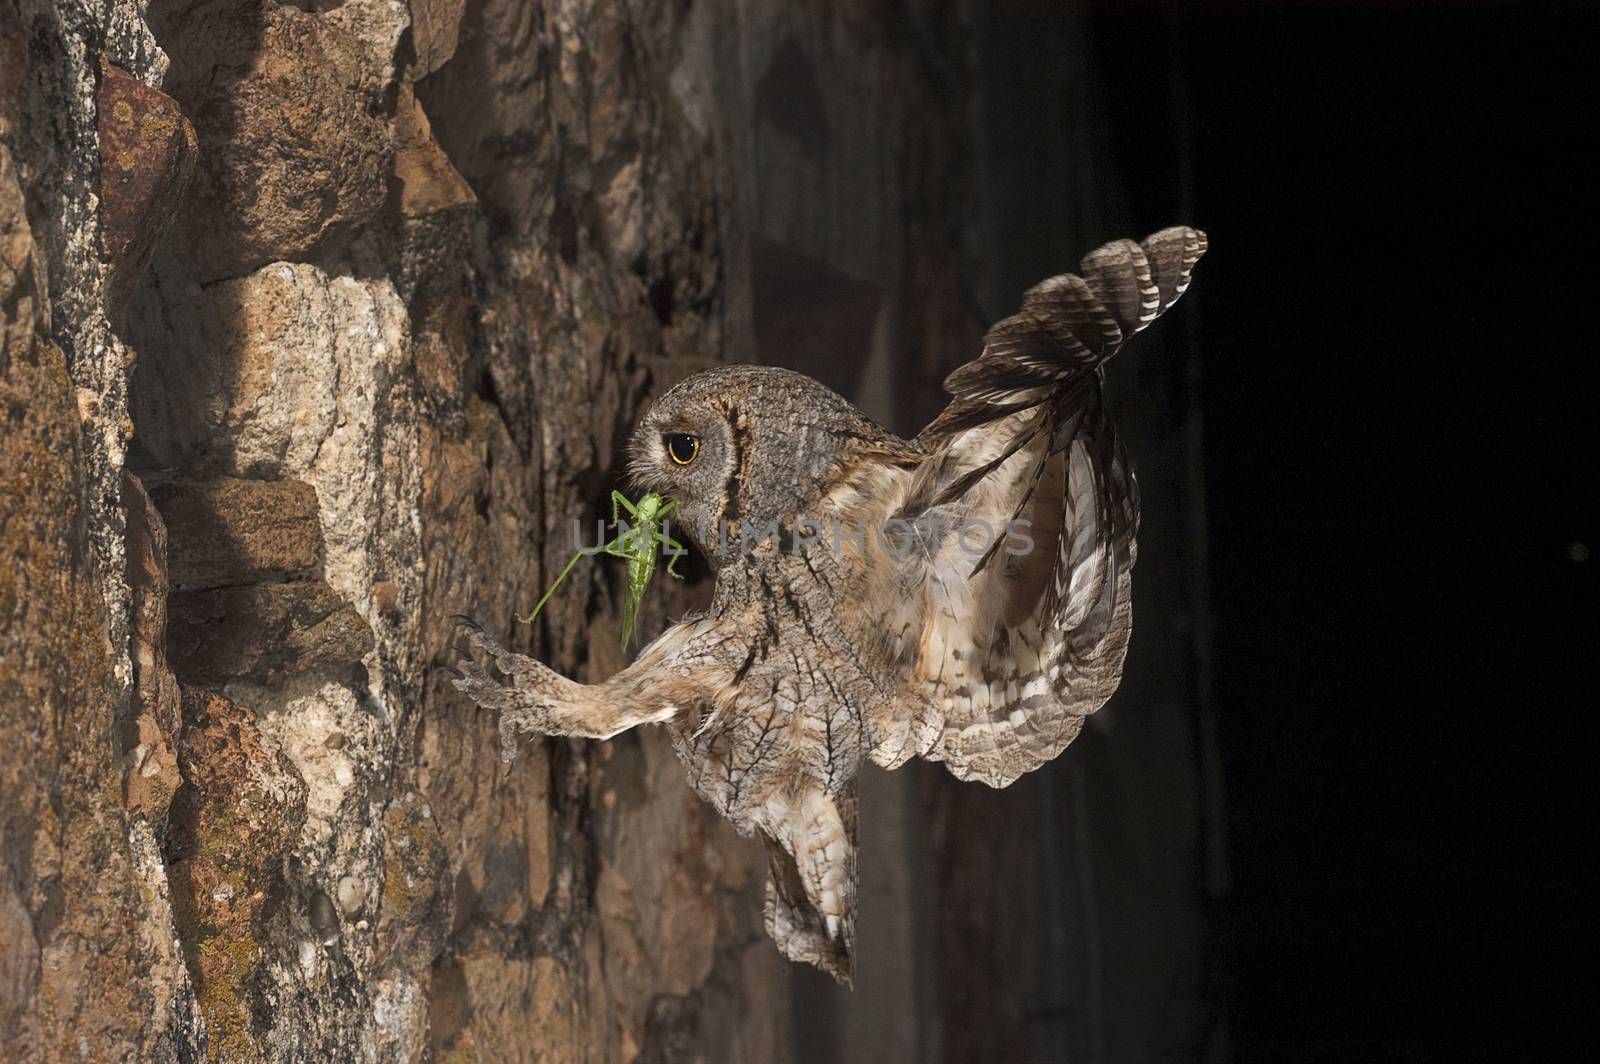 Eurasian Scops Owl, small owl, flying and hunting, with an insect grasshopper in the beak, night scene